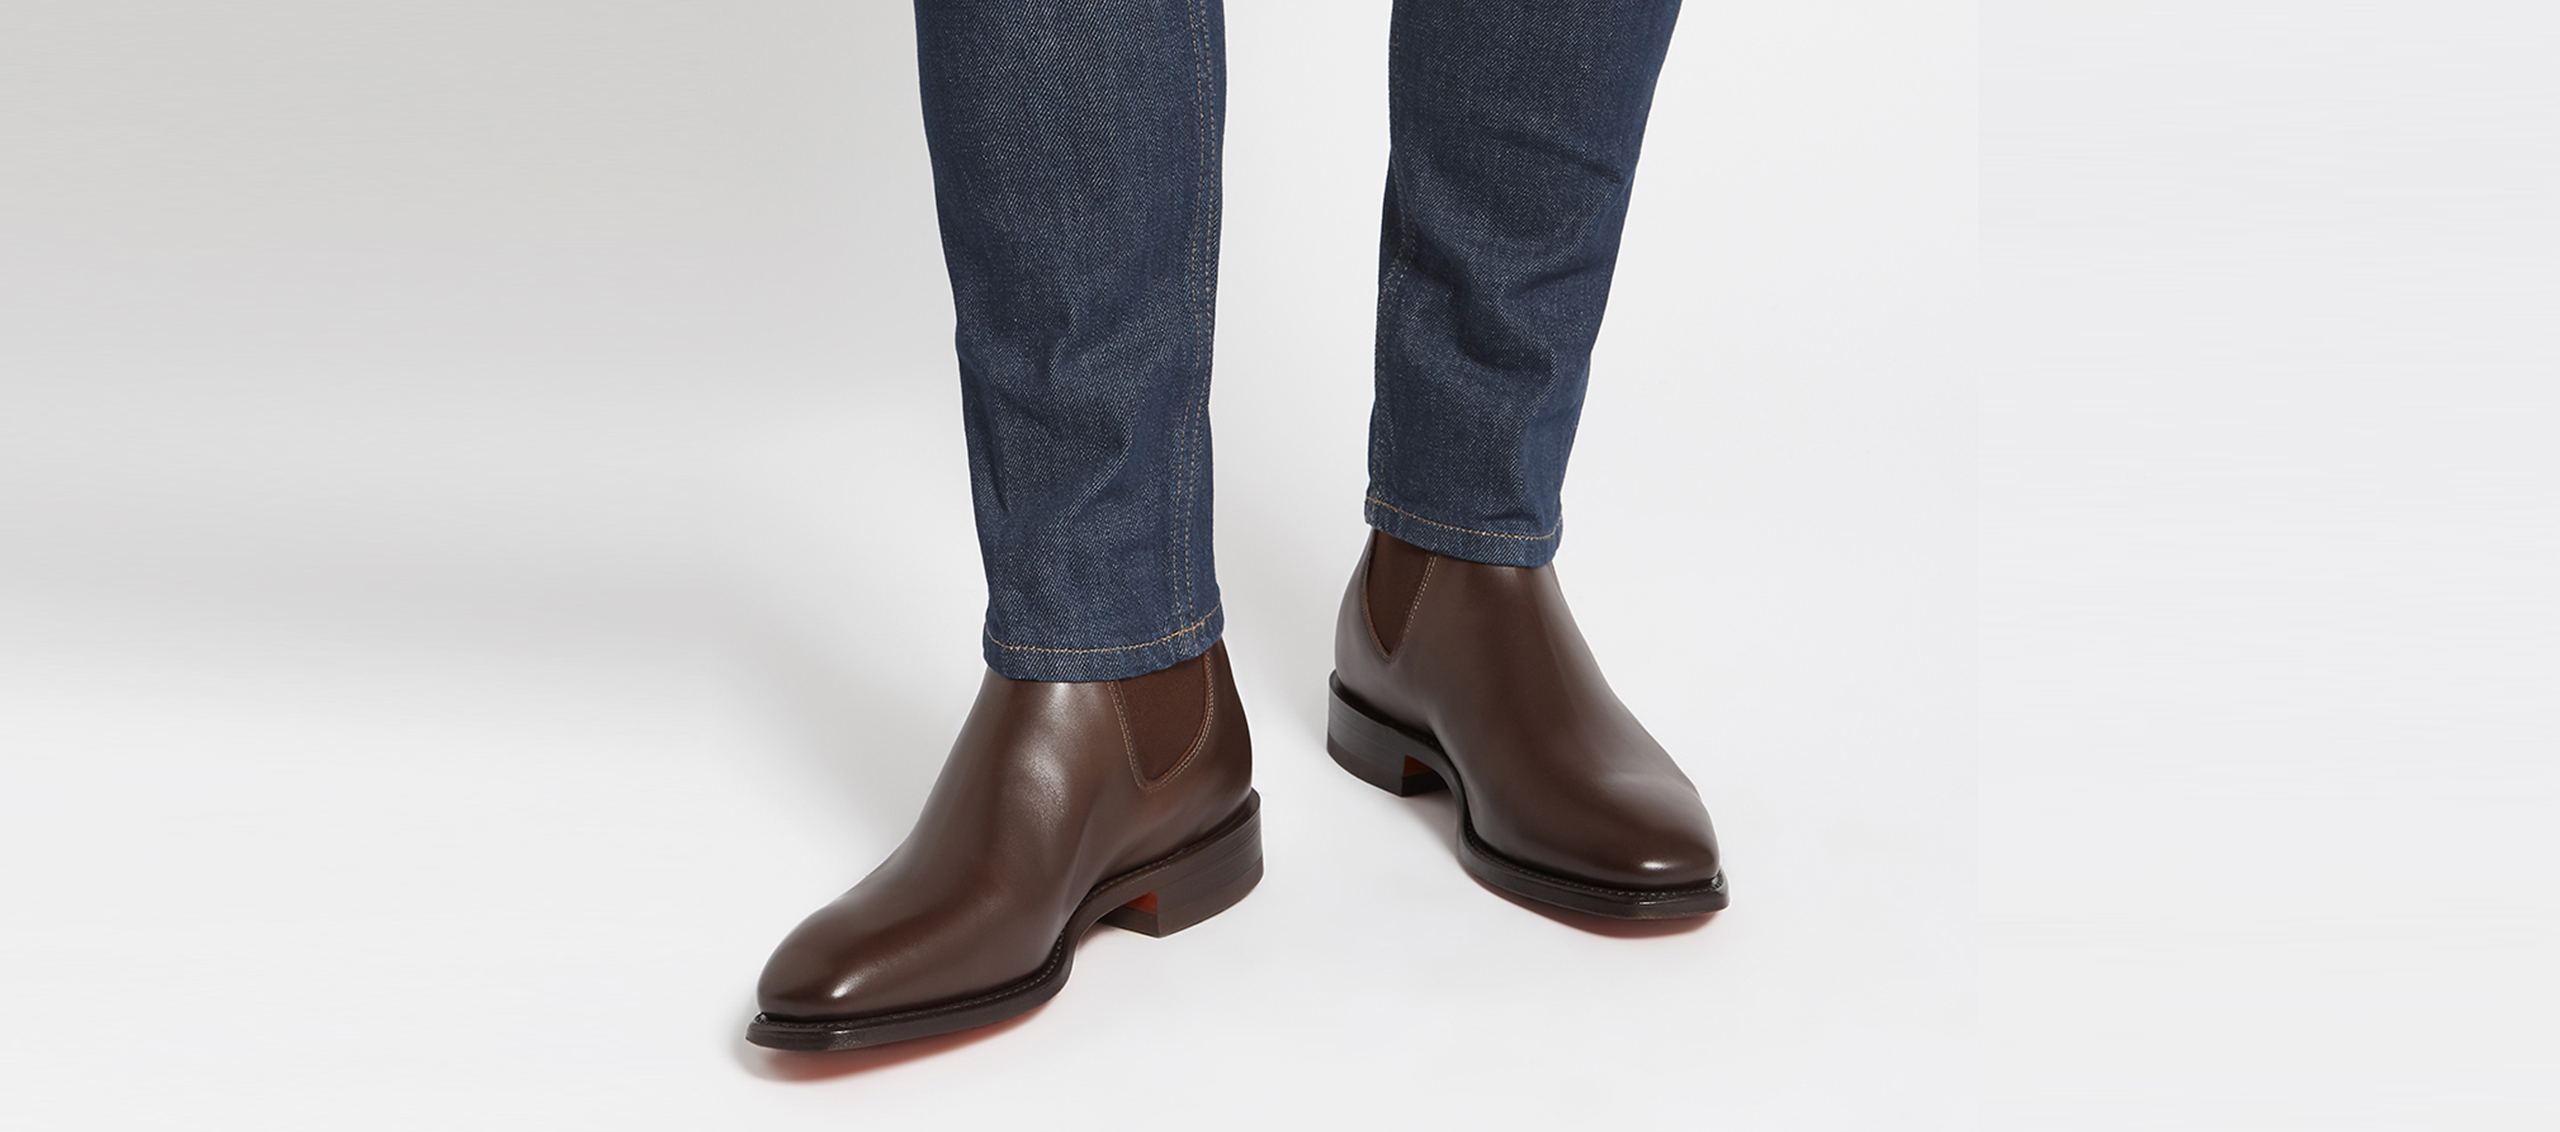 chestnut rm williams boots